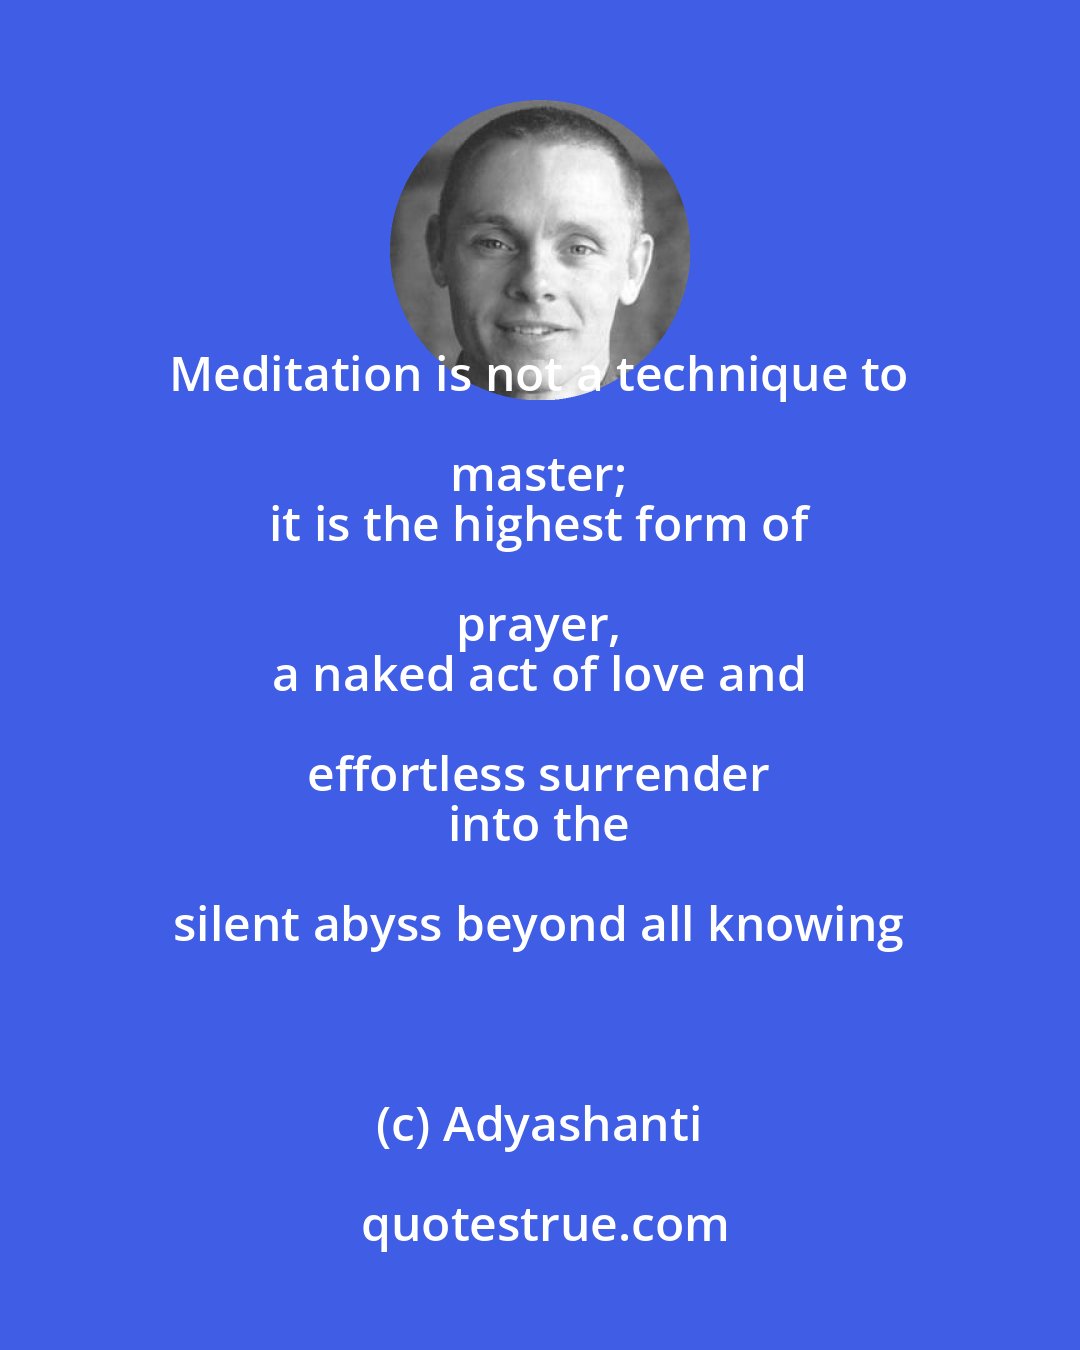 Adyashanti: Meditation is not a technique to master; 
 it is the highest form of prayer, 
 a naked act of love and effortless surrender 
 into the silent abyss beyond all knowing